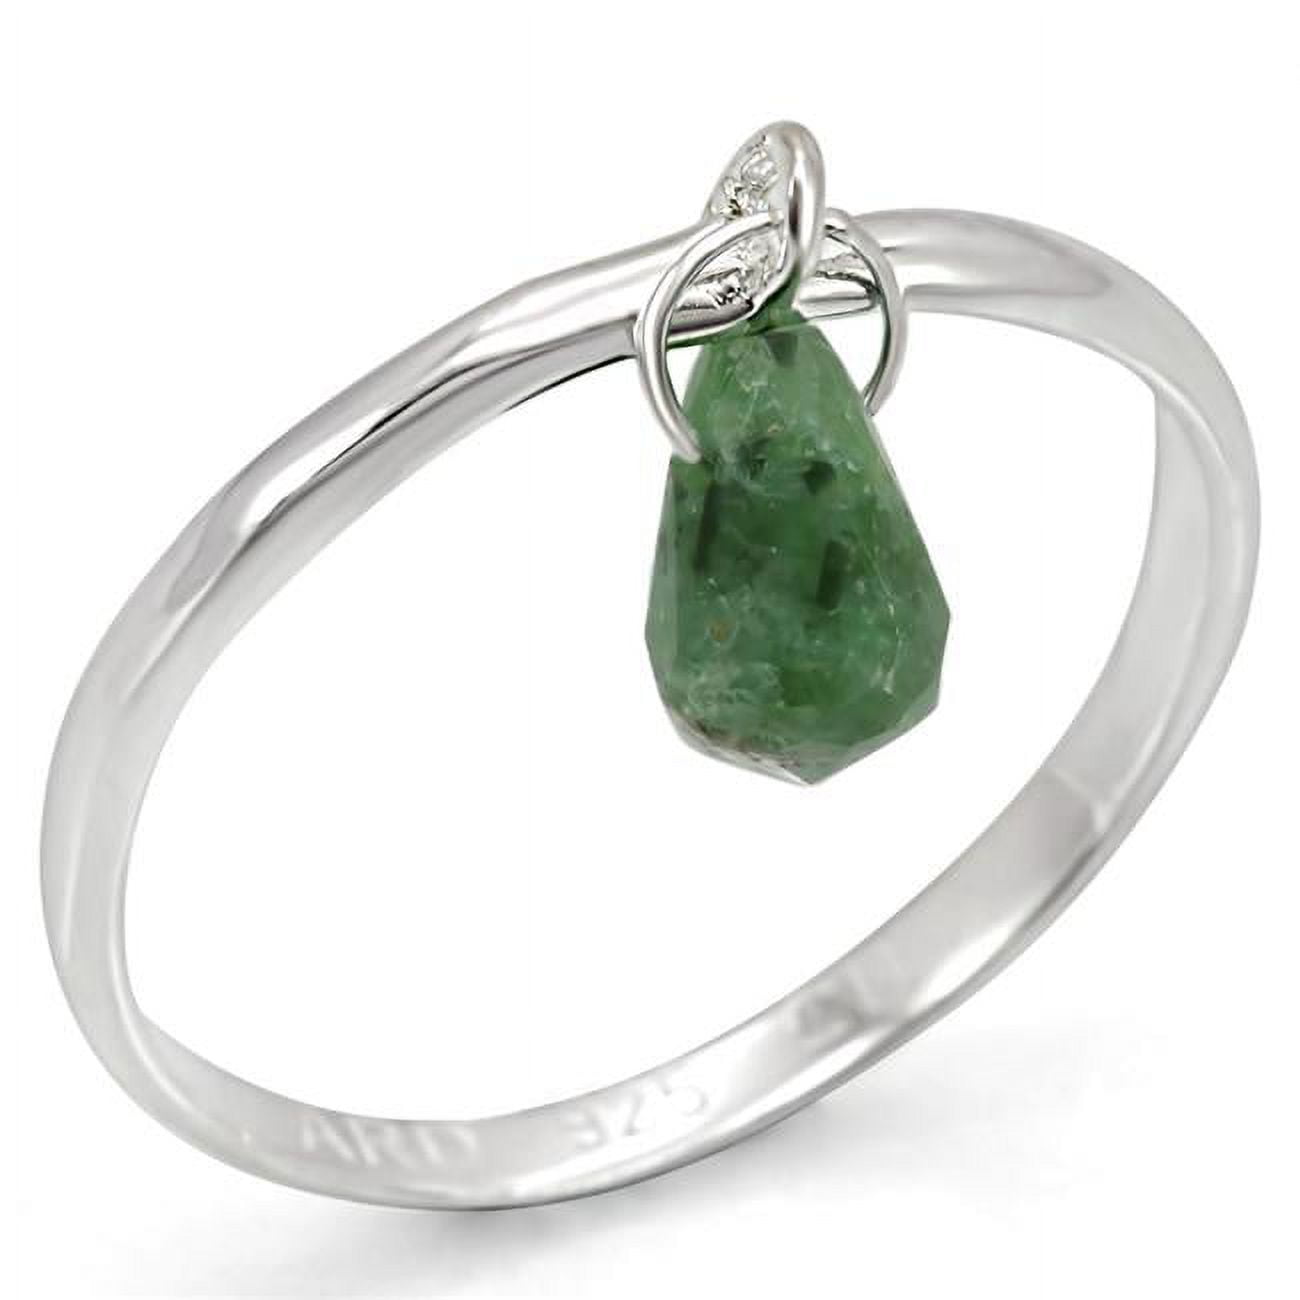 Picture of Alamode LOS322-11 Women Silver 925 Sterling Silver Ring with Genuine Stone in Emerald - Size 11